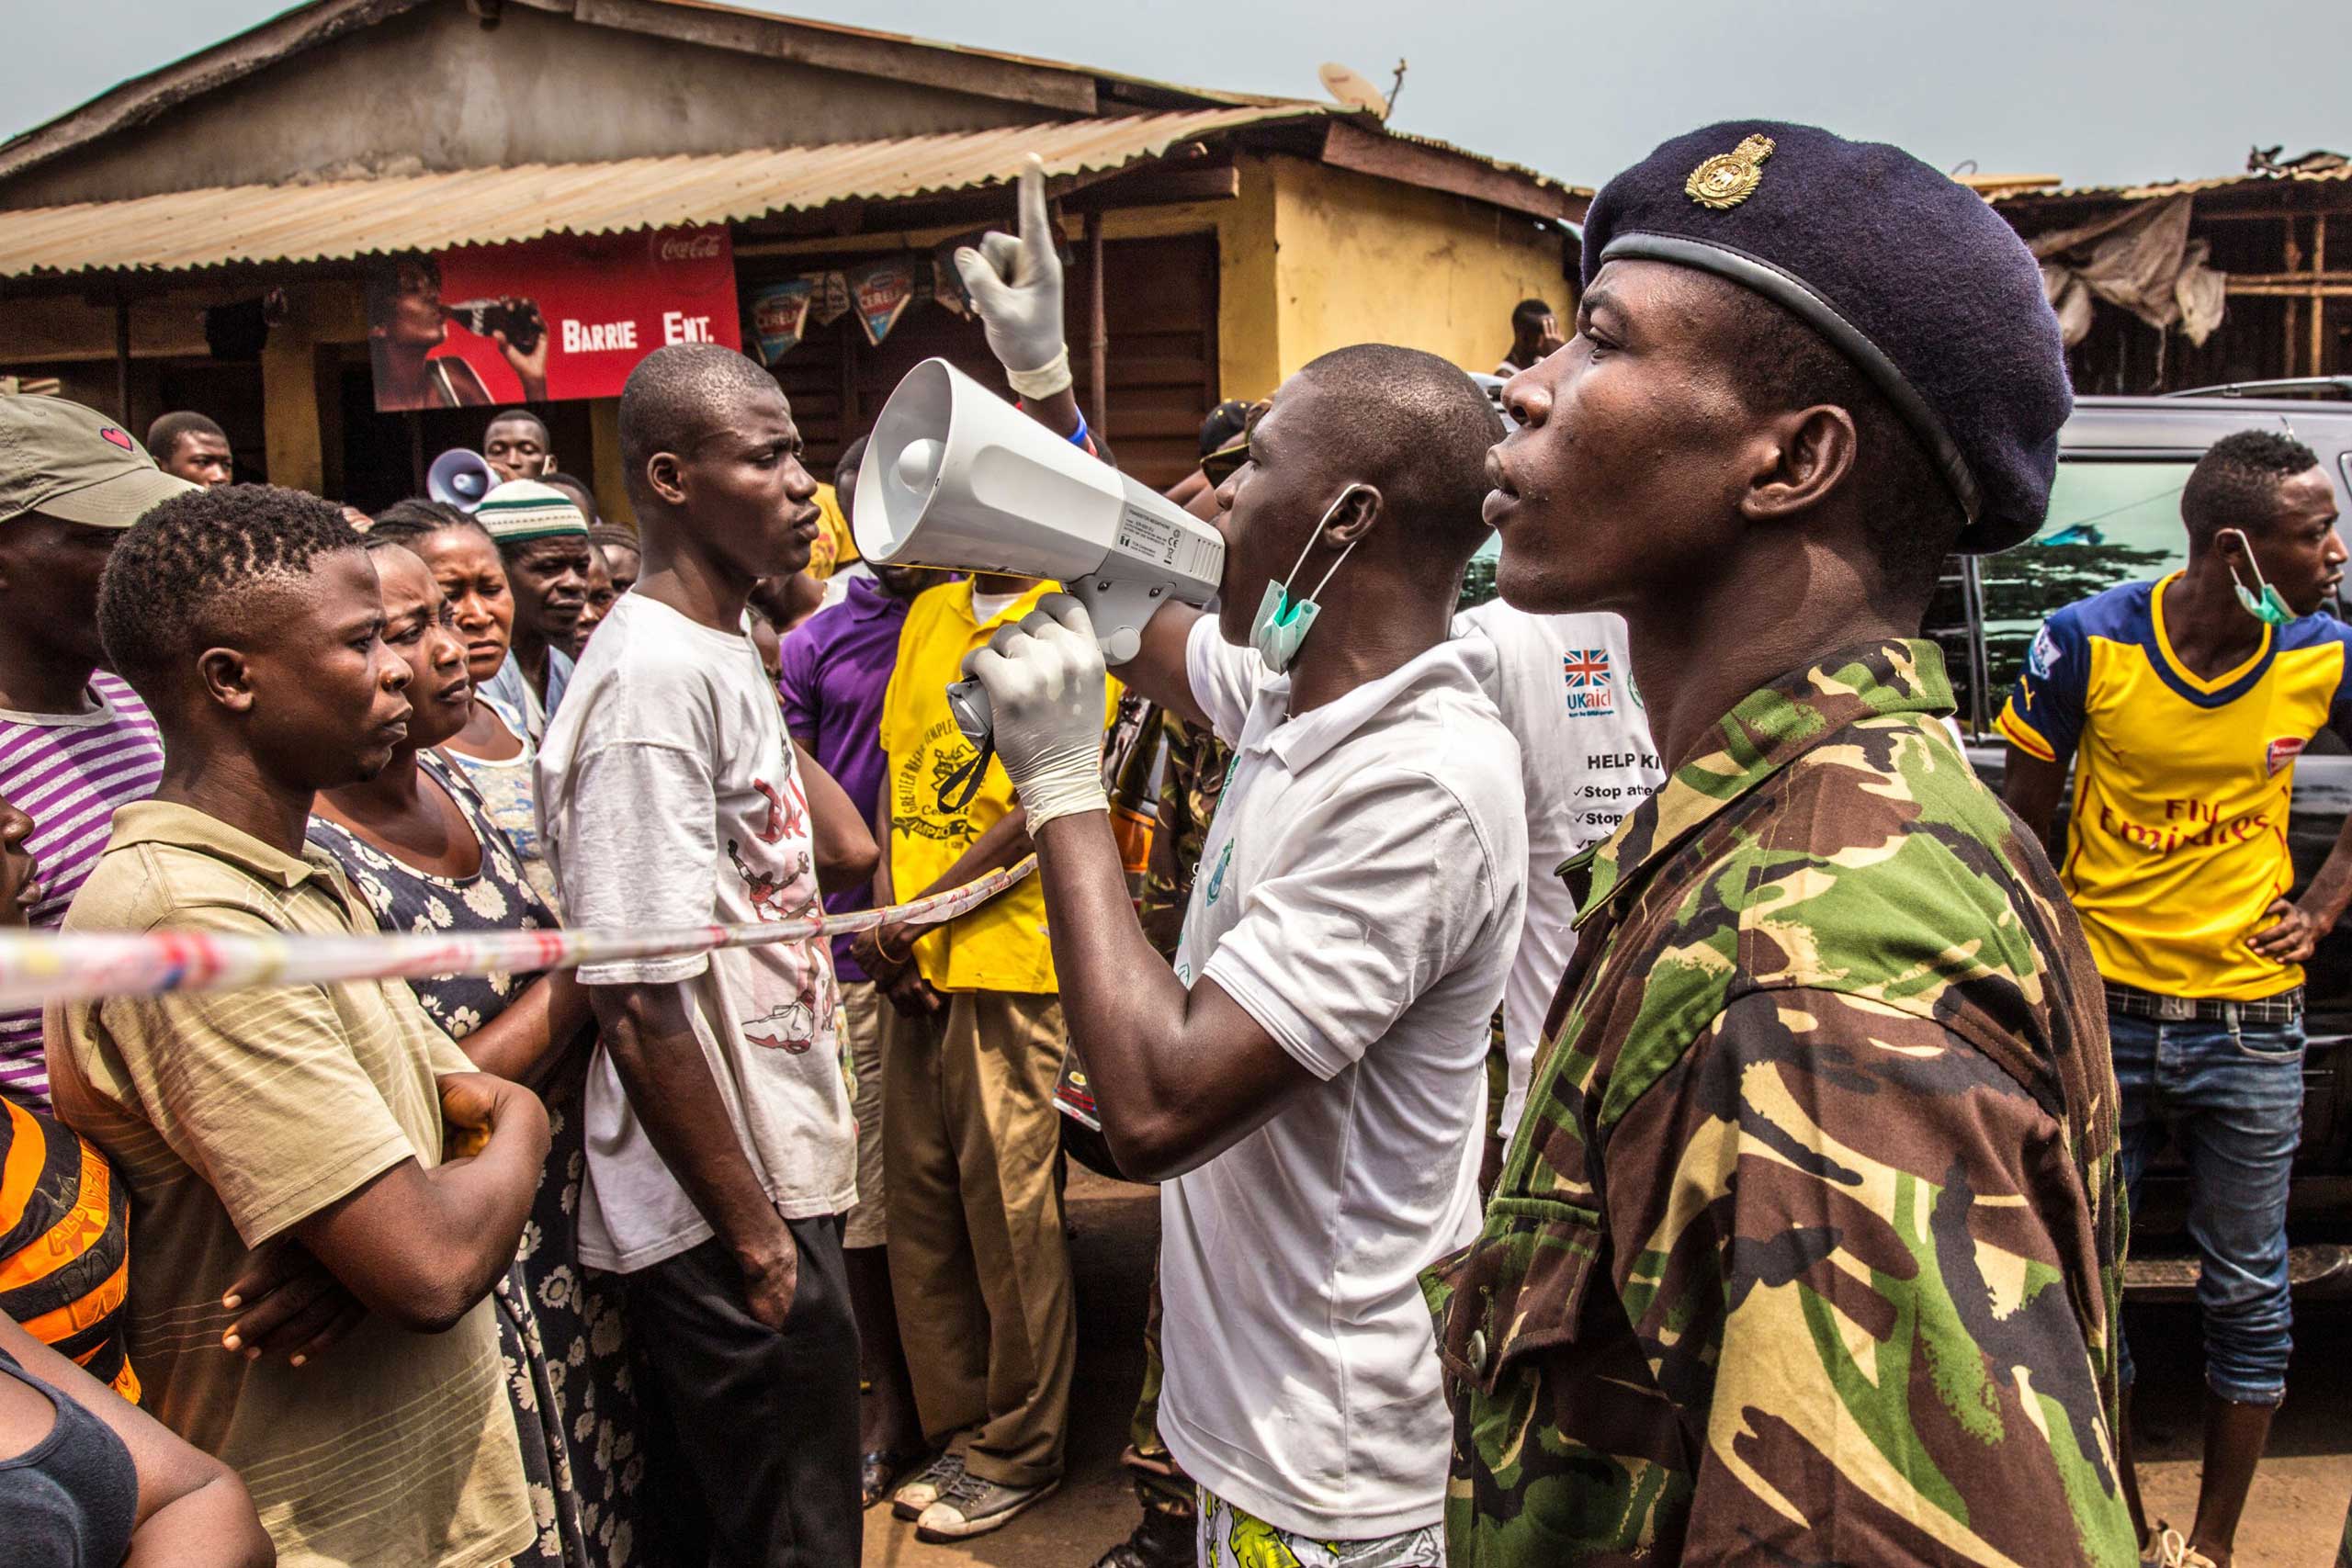 People stand in line for food to be distributed to them as a health worker makes an announcement in Freetown, Sierra Leone on March 27, 2015. (Michael Duff—AP)